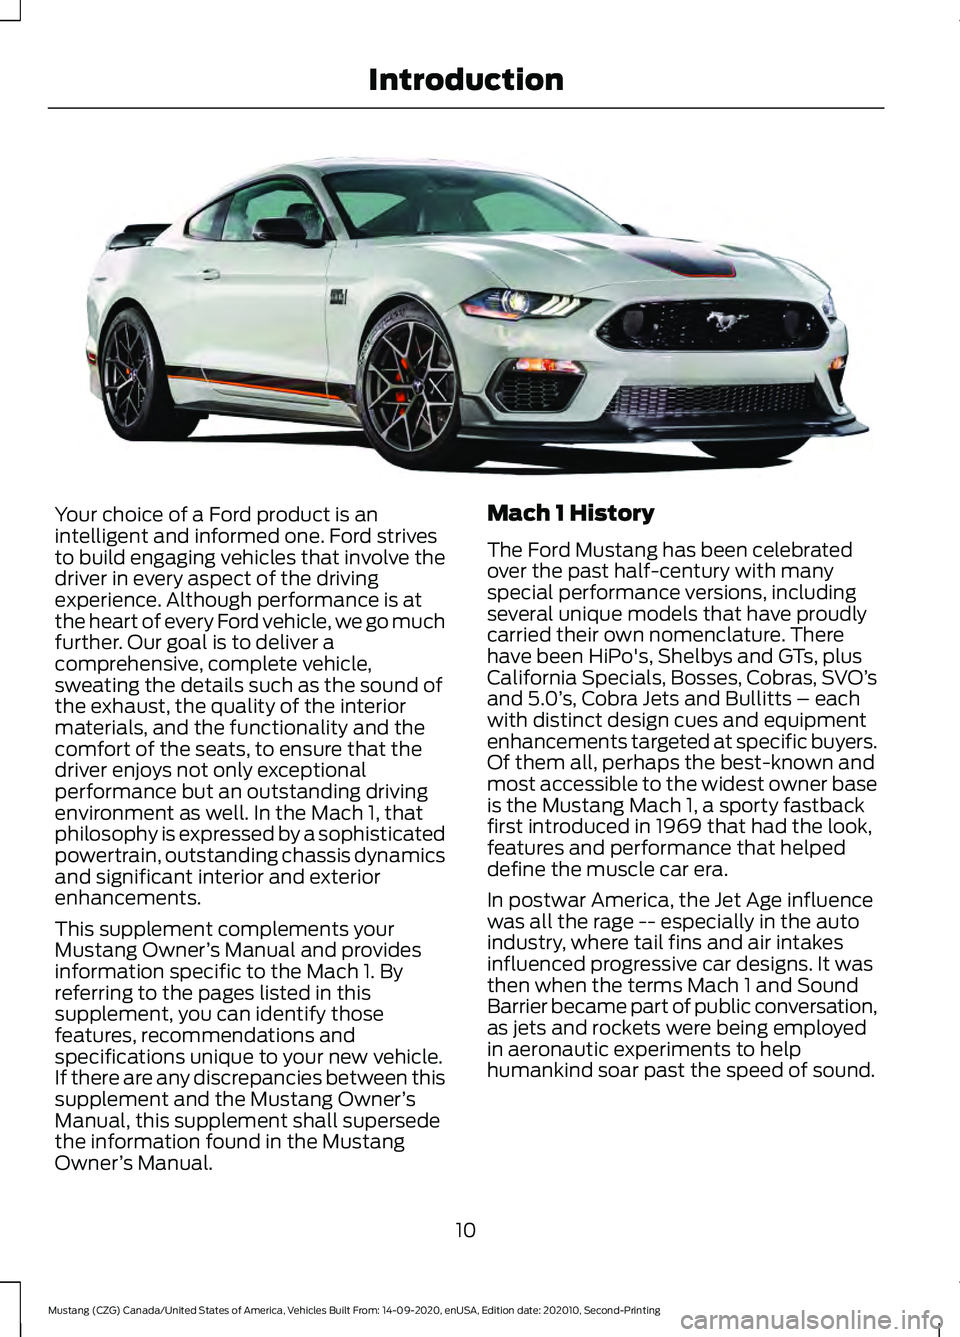 FORD MUSTANG 2021 User Guide Your choice of a Ford product is an
intelligent and informed one. Ford strives
to build engaging vehicles that involve the
driver in every aspect of the driving
experience. Although performance is at
